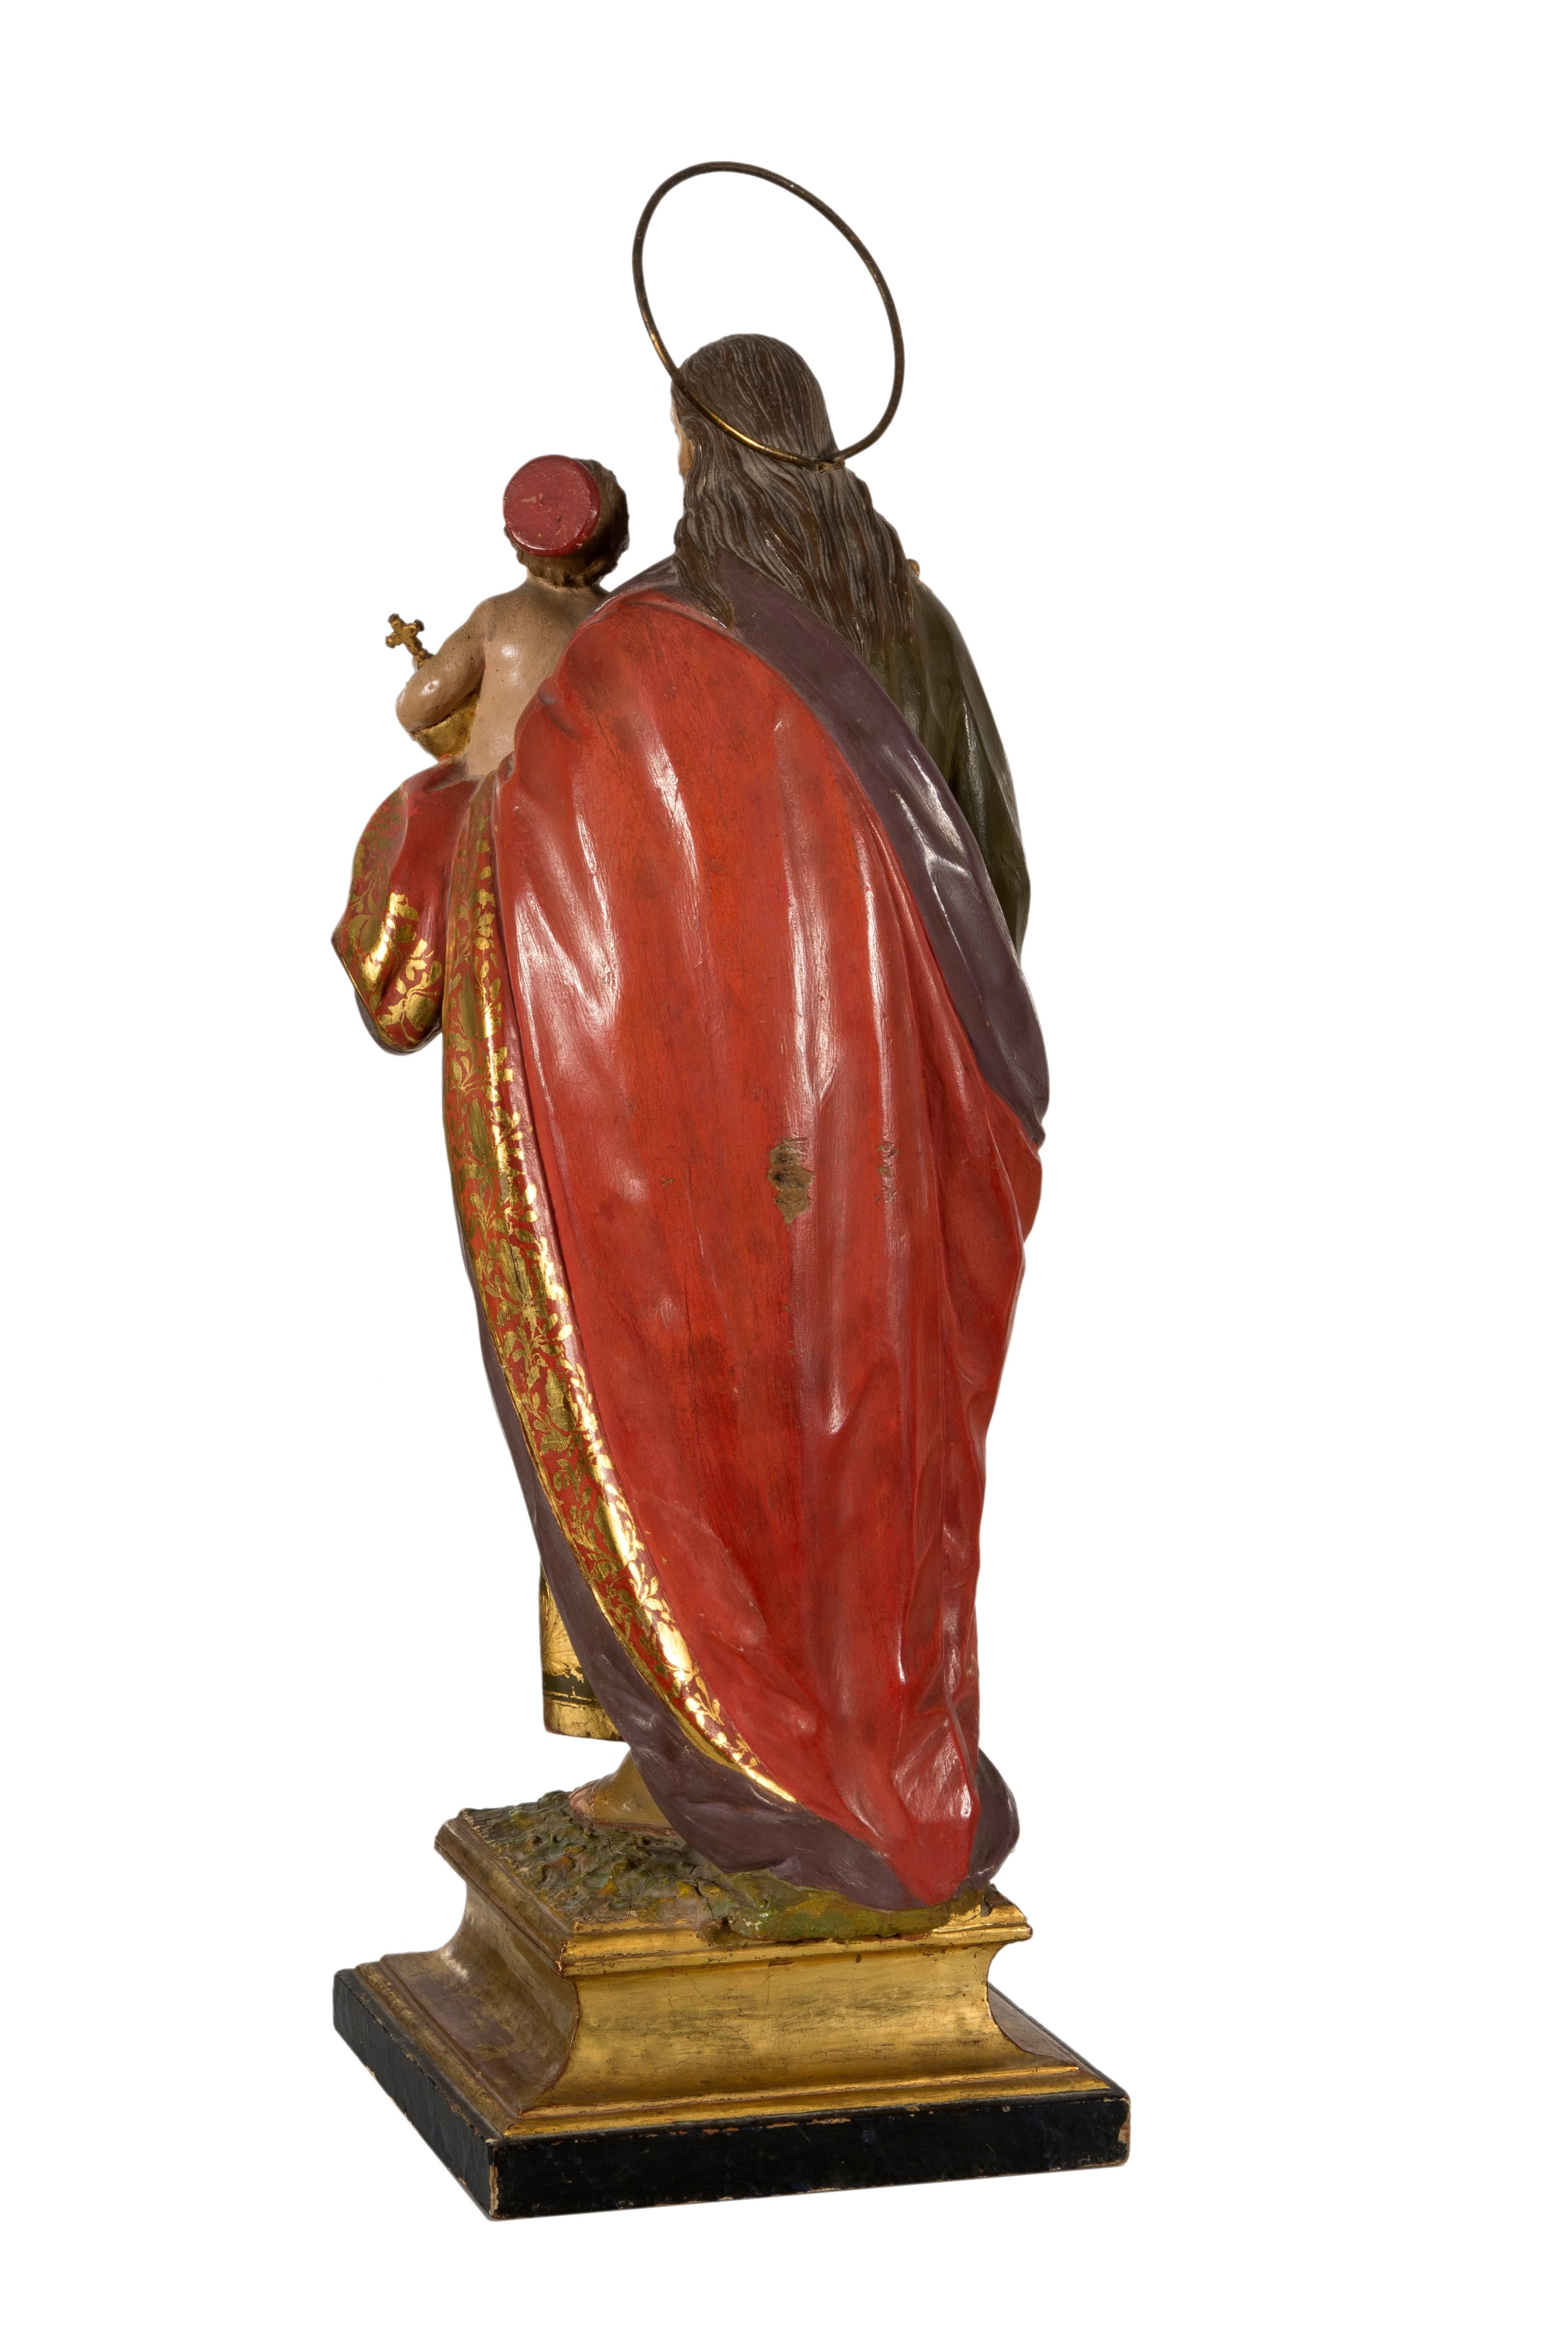 Hand-Carved Saint Joseph with Child Jesus, Andalusian School, Spain, 18th Century